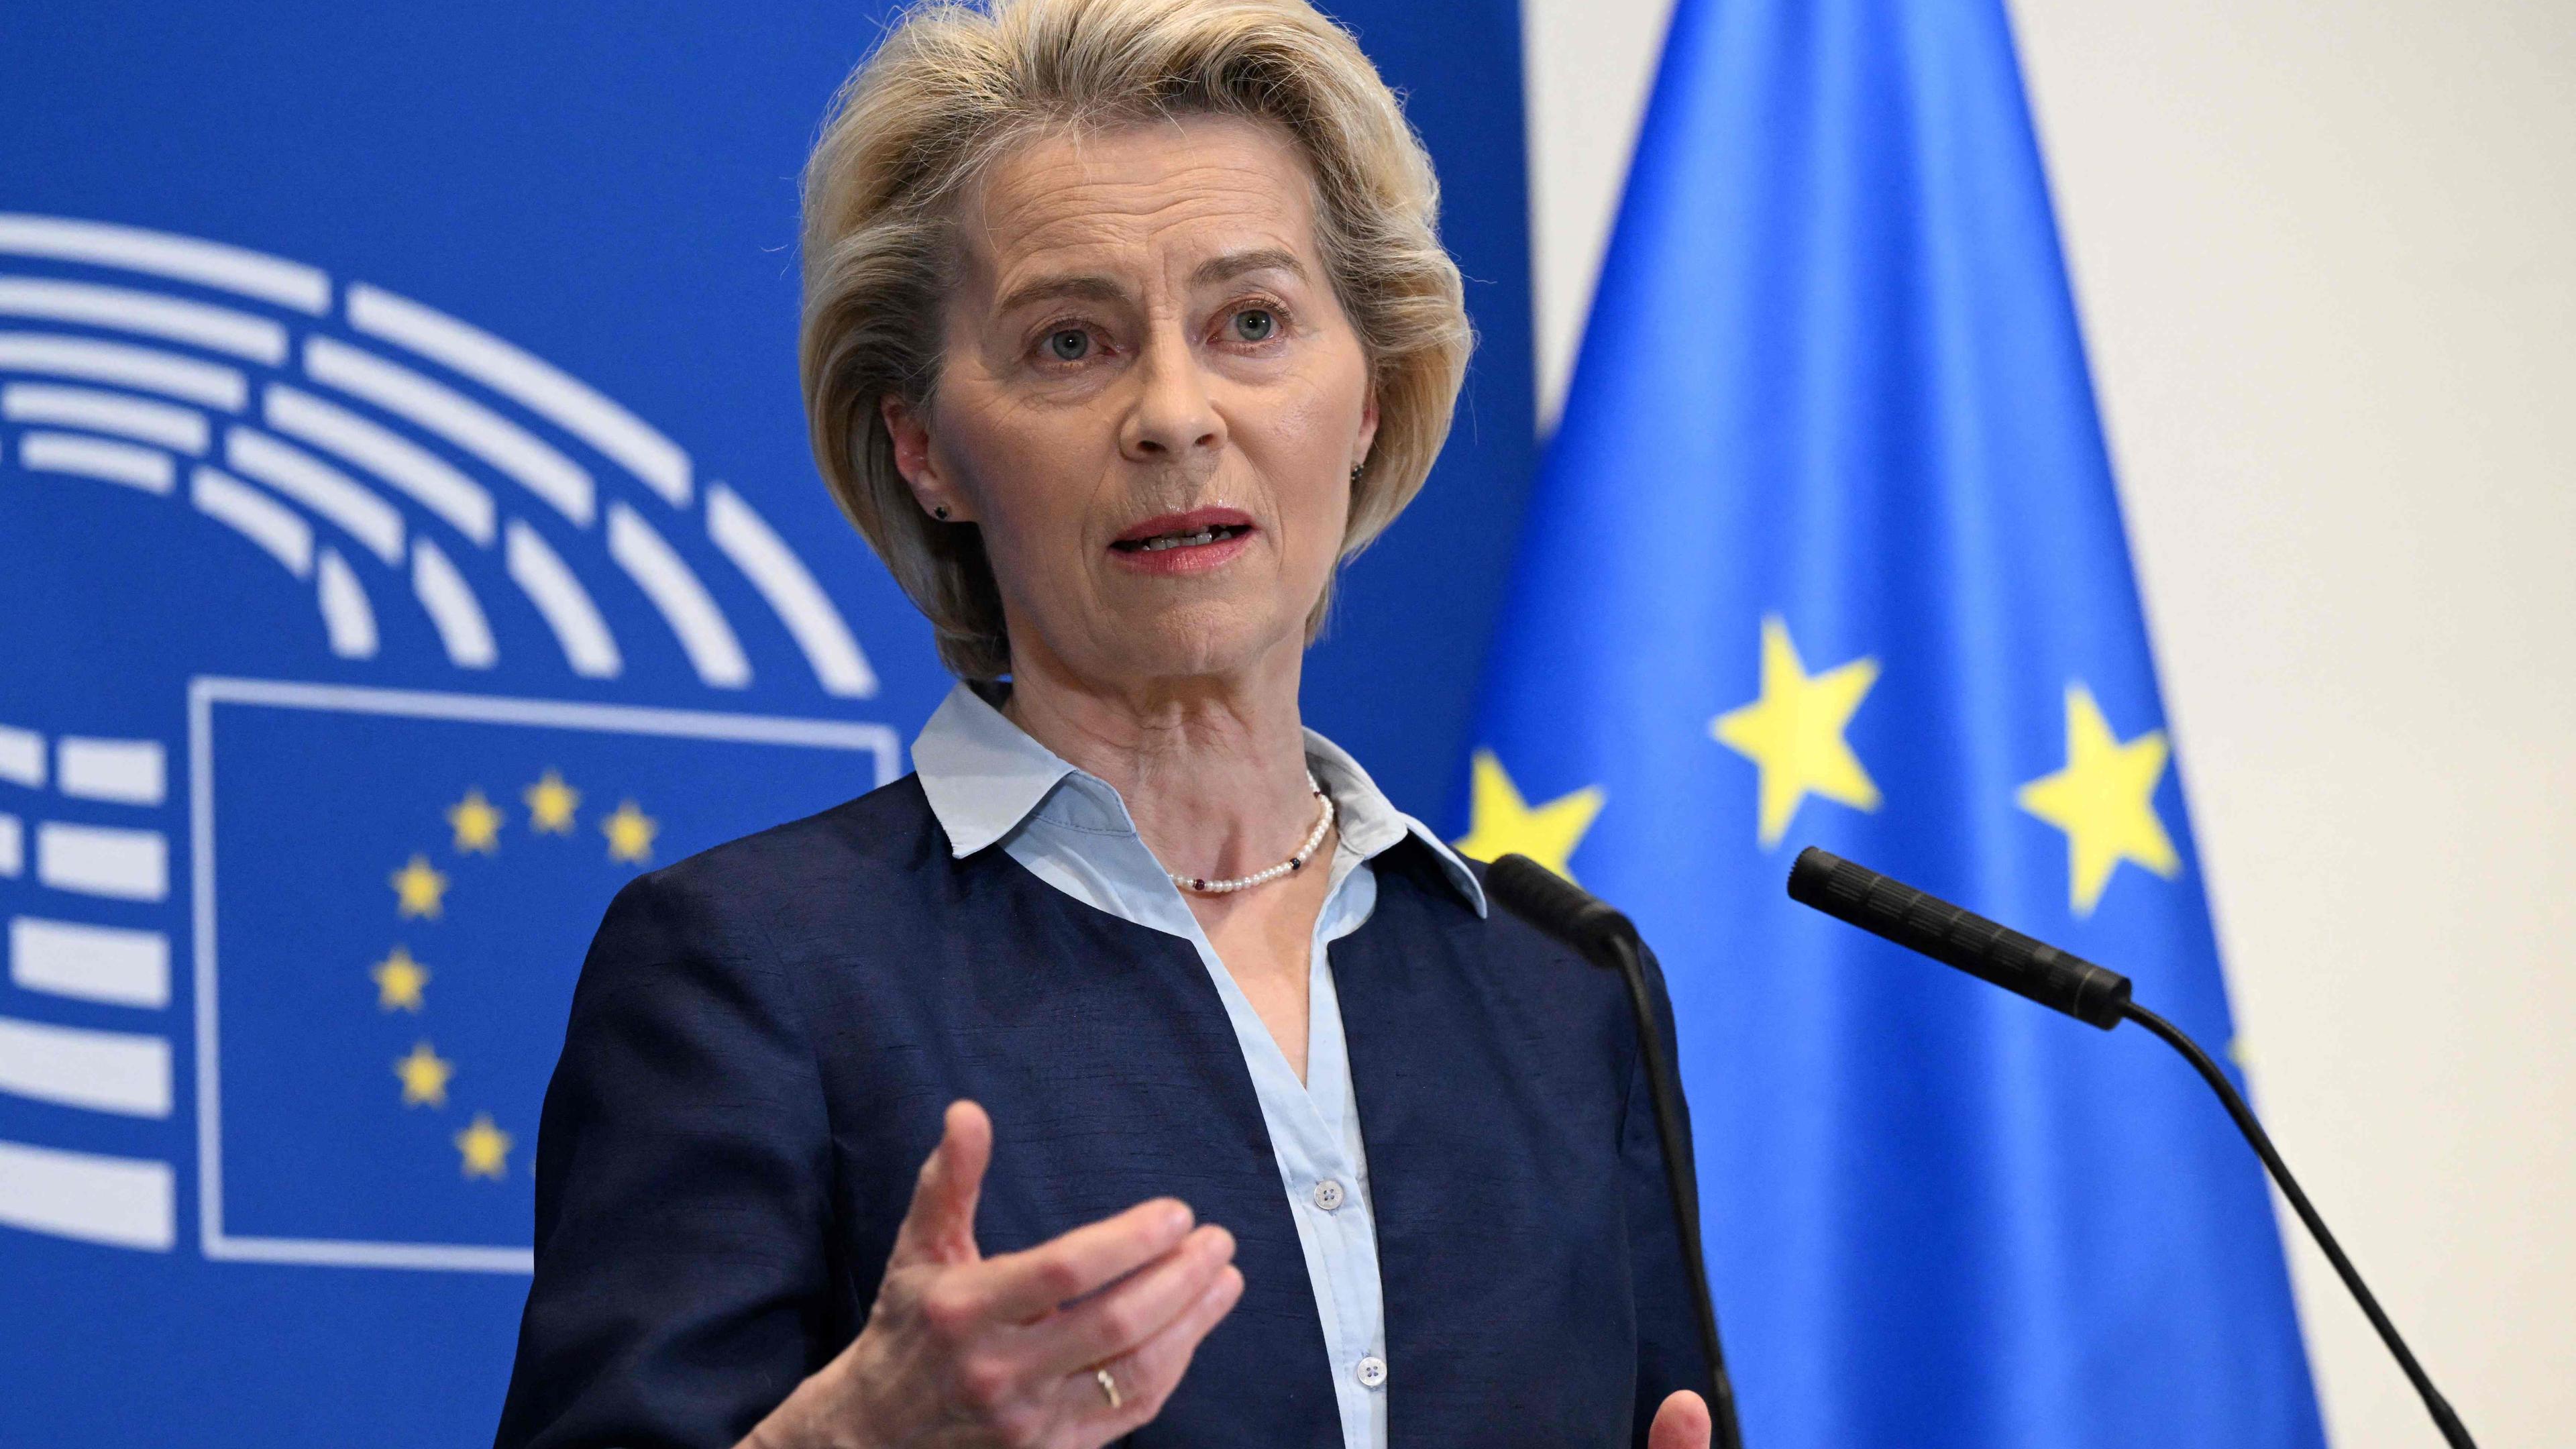 The EU is counting on Lebanon’s cooperation to stop undocumented migrants and to combat migrant smuggling, von der Leyen said.